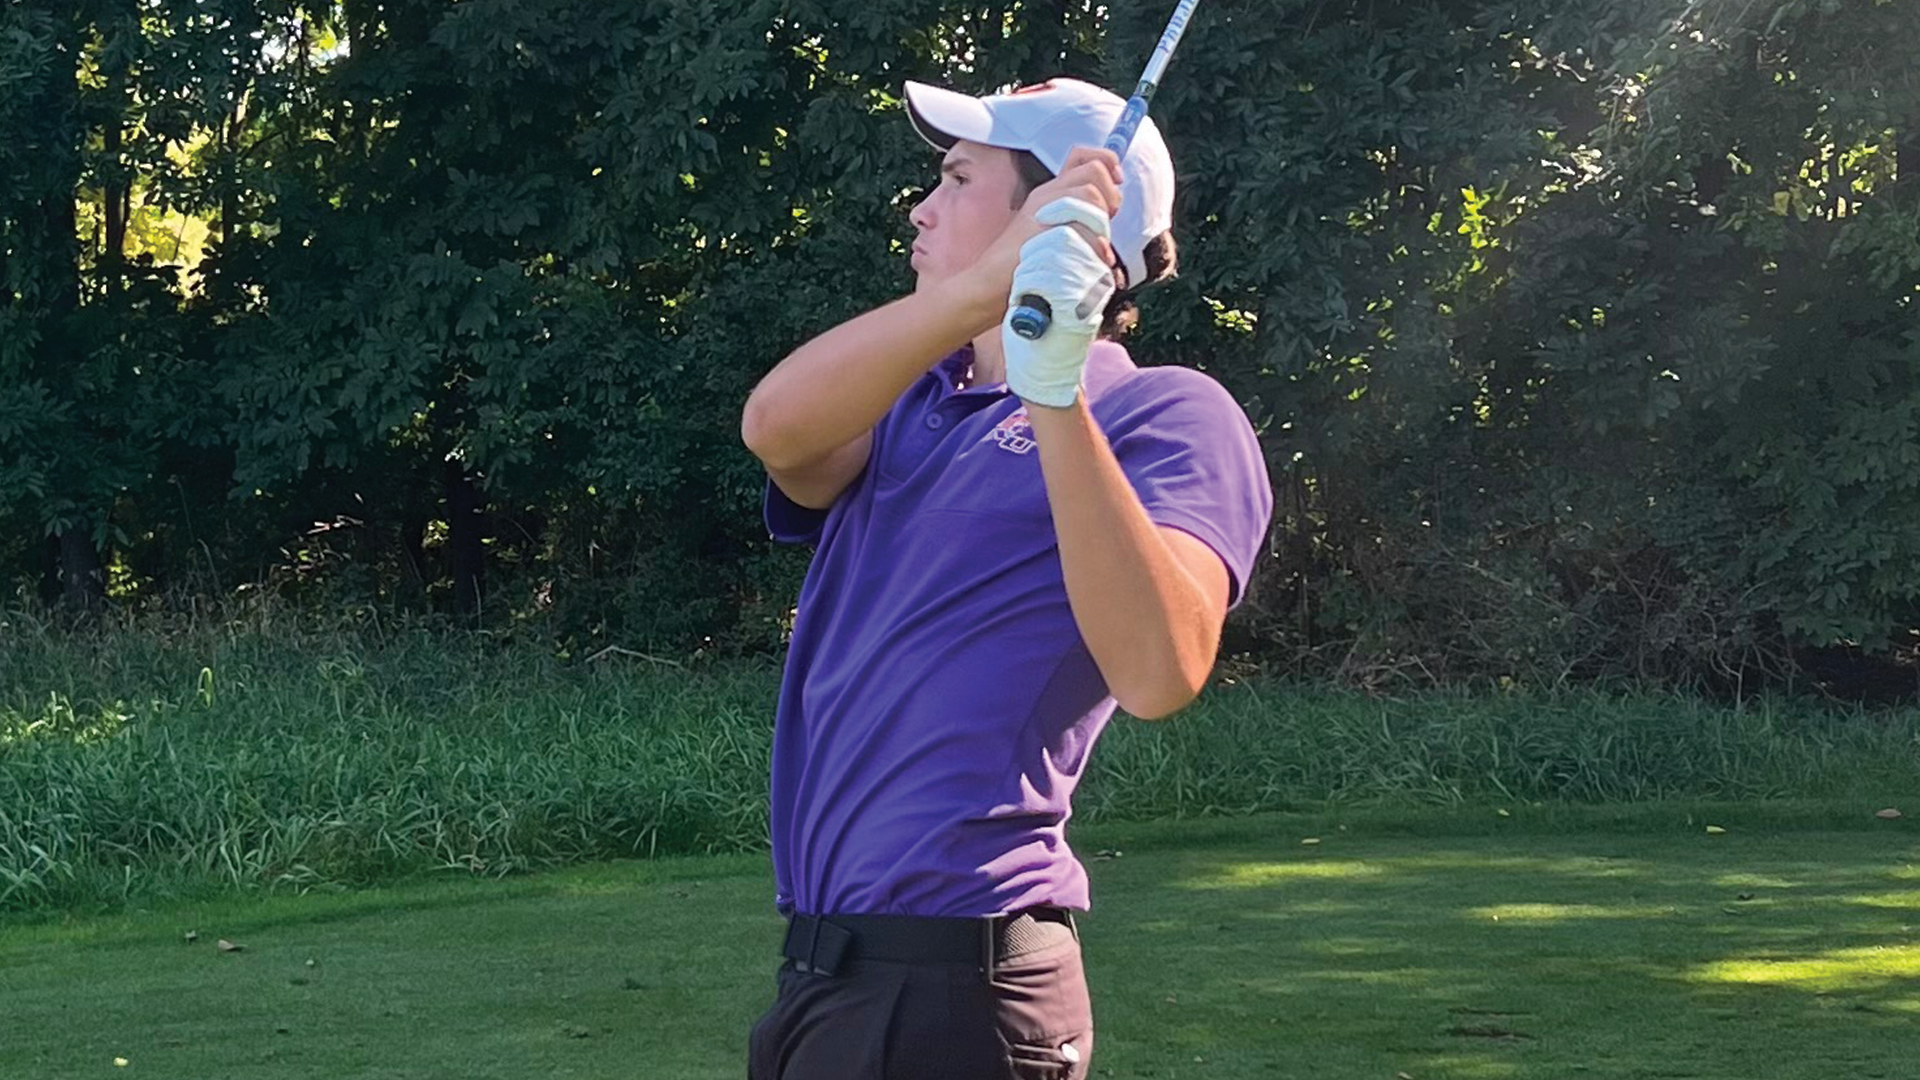 SIGNORINI LEADS TIGERS AT BATTLE AT BLACKTHORN